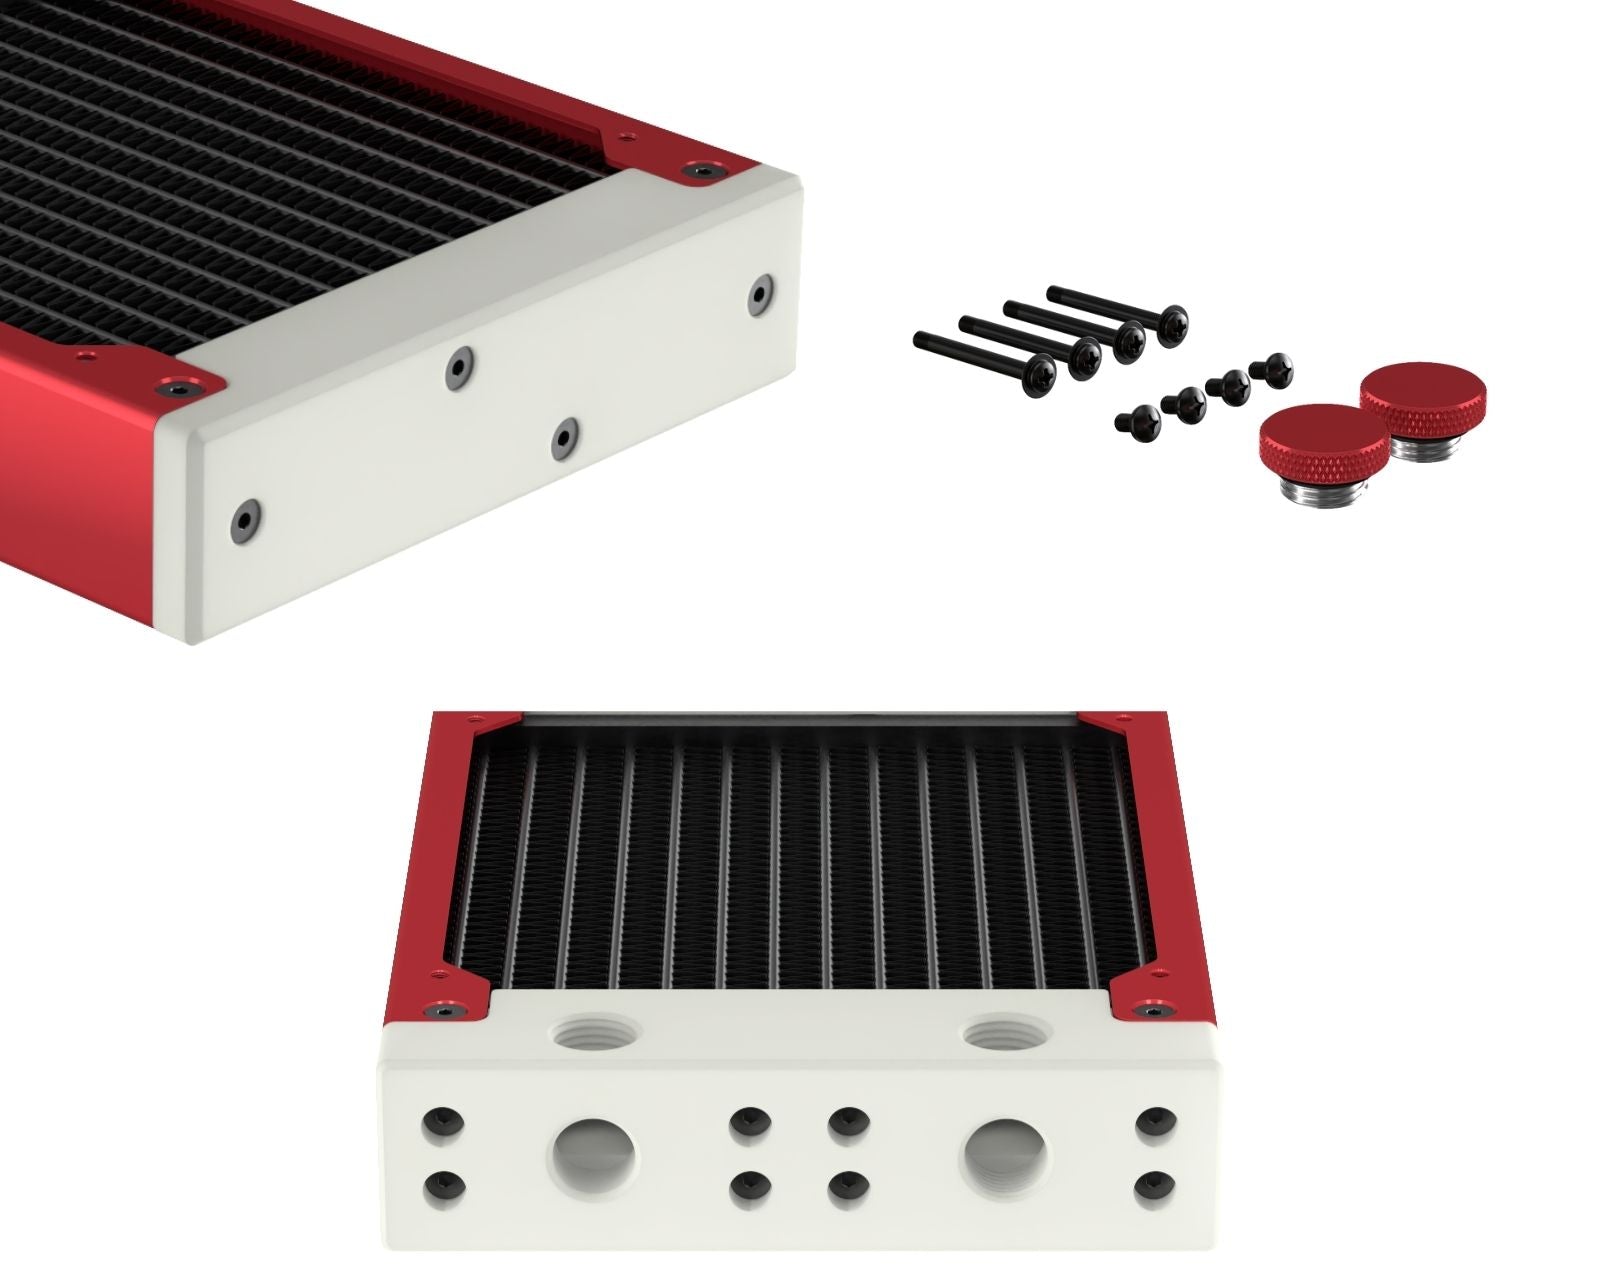 PrimoChill 120SL (30mm) EXIMO Modular Radiator, White POM, 1x120mm, Single Fan (R-SL-W12) Available in 20+ Colors, Assembled in USA and Custom Watercooling Loop Ready - Candy Red